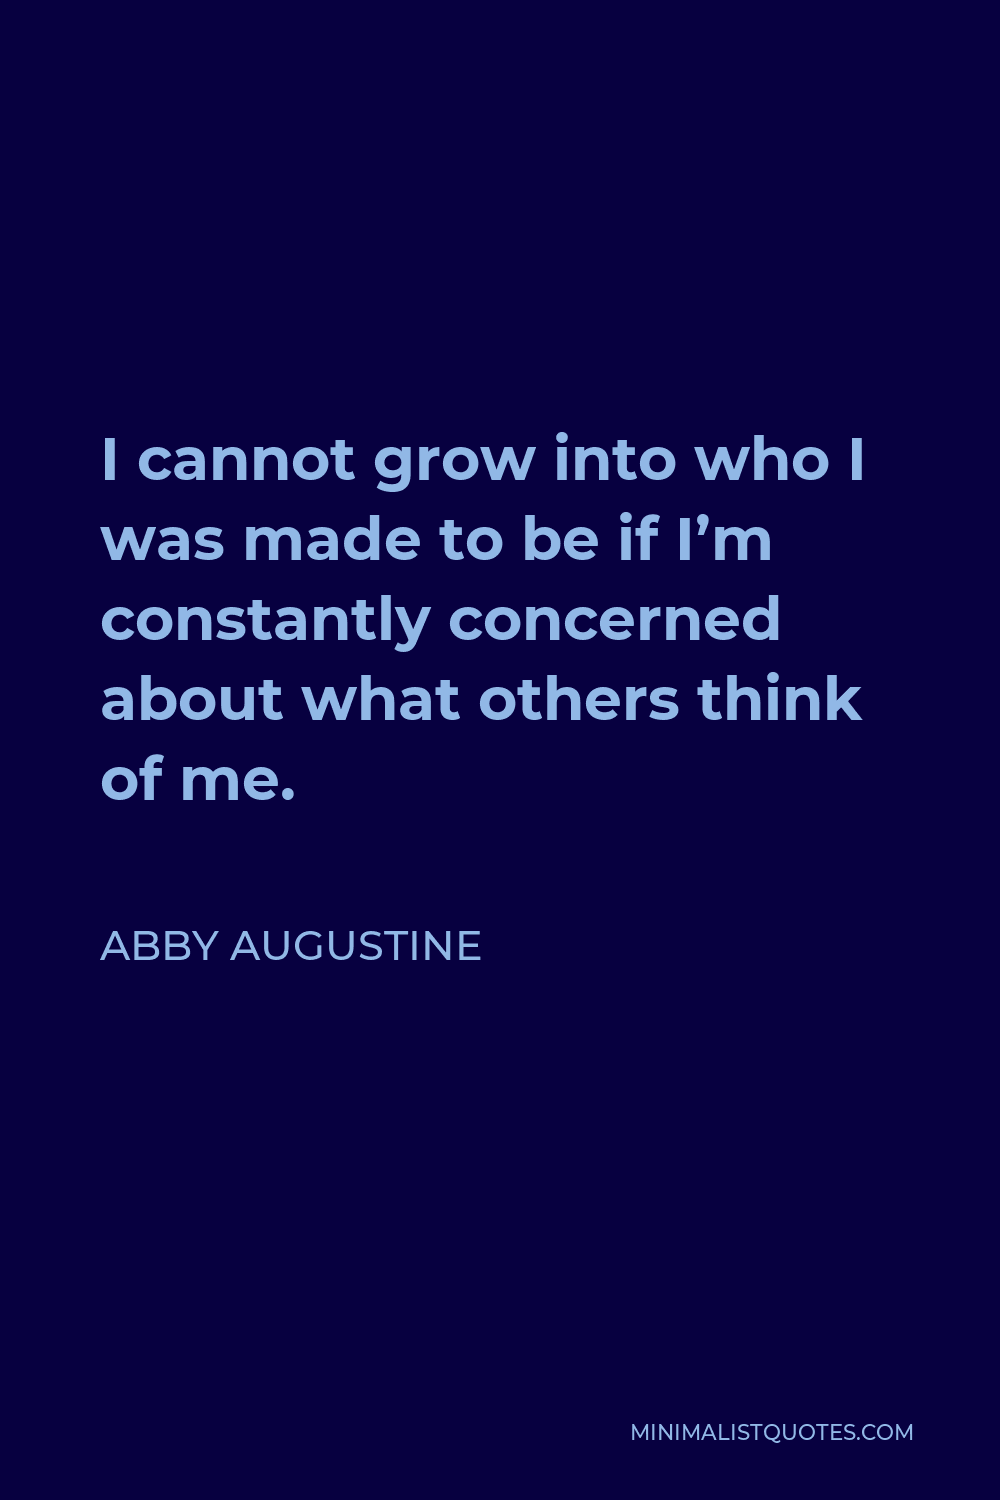 Abby Augustine Quote - I cannot grow into who I was made to be if I’m constantly concerned about what others think of me.